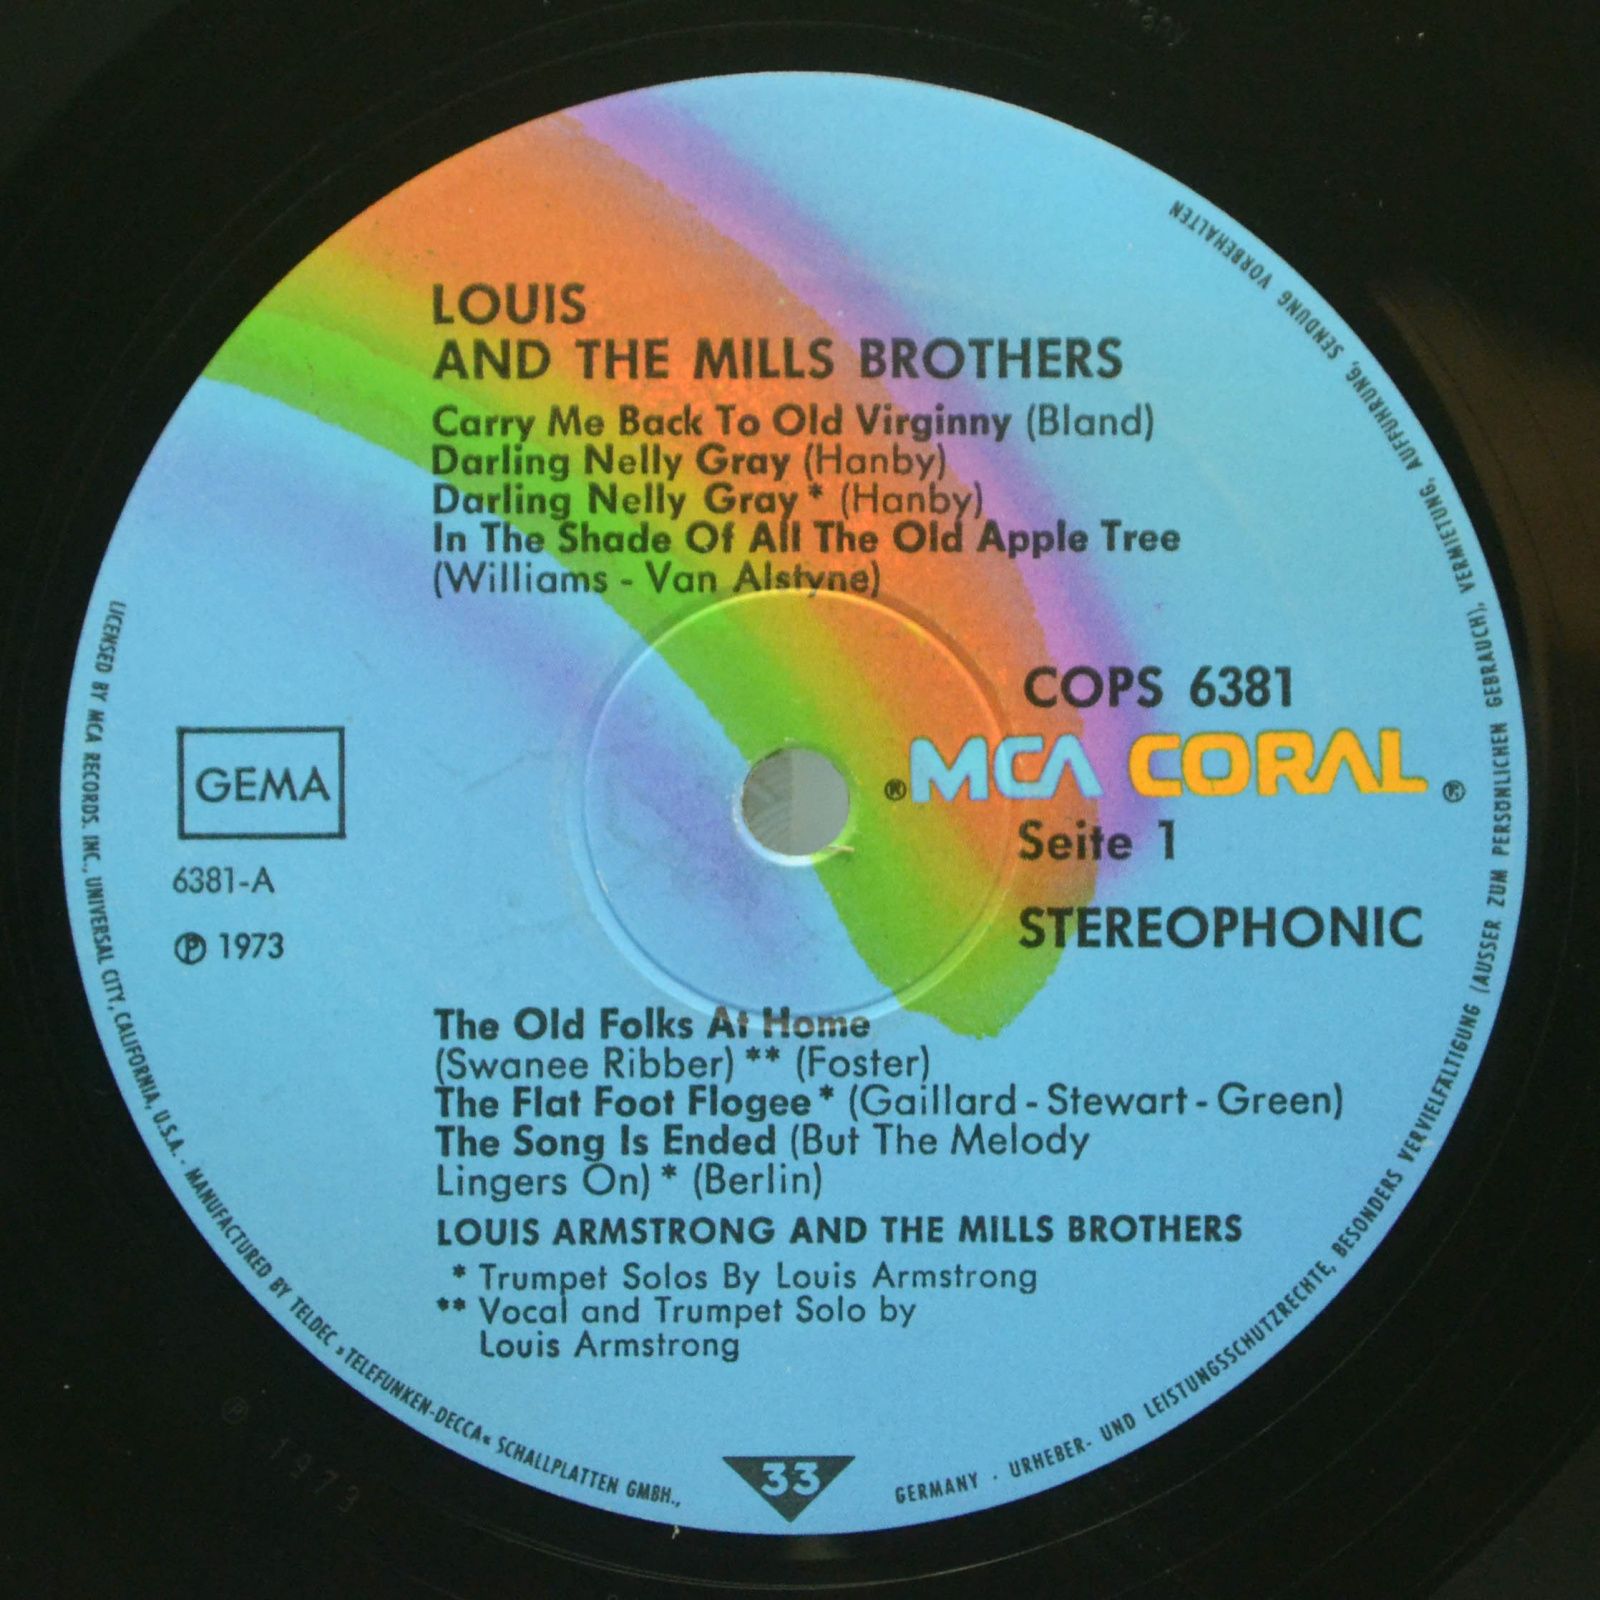 Louis And The Mills Brothers — Louis And The Mills Brothers, 1973